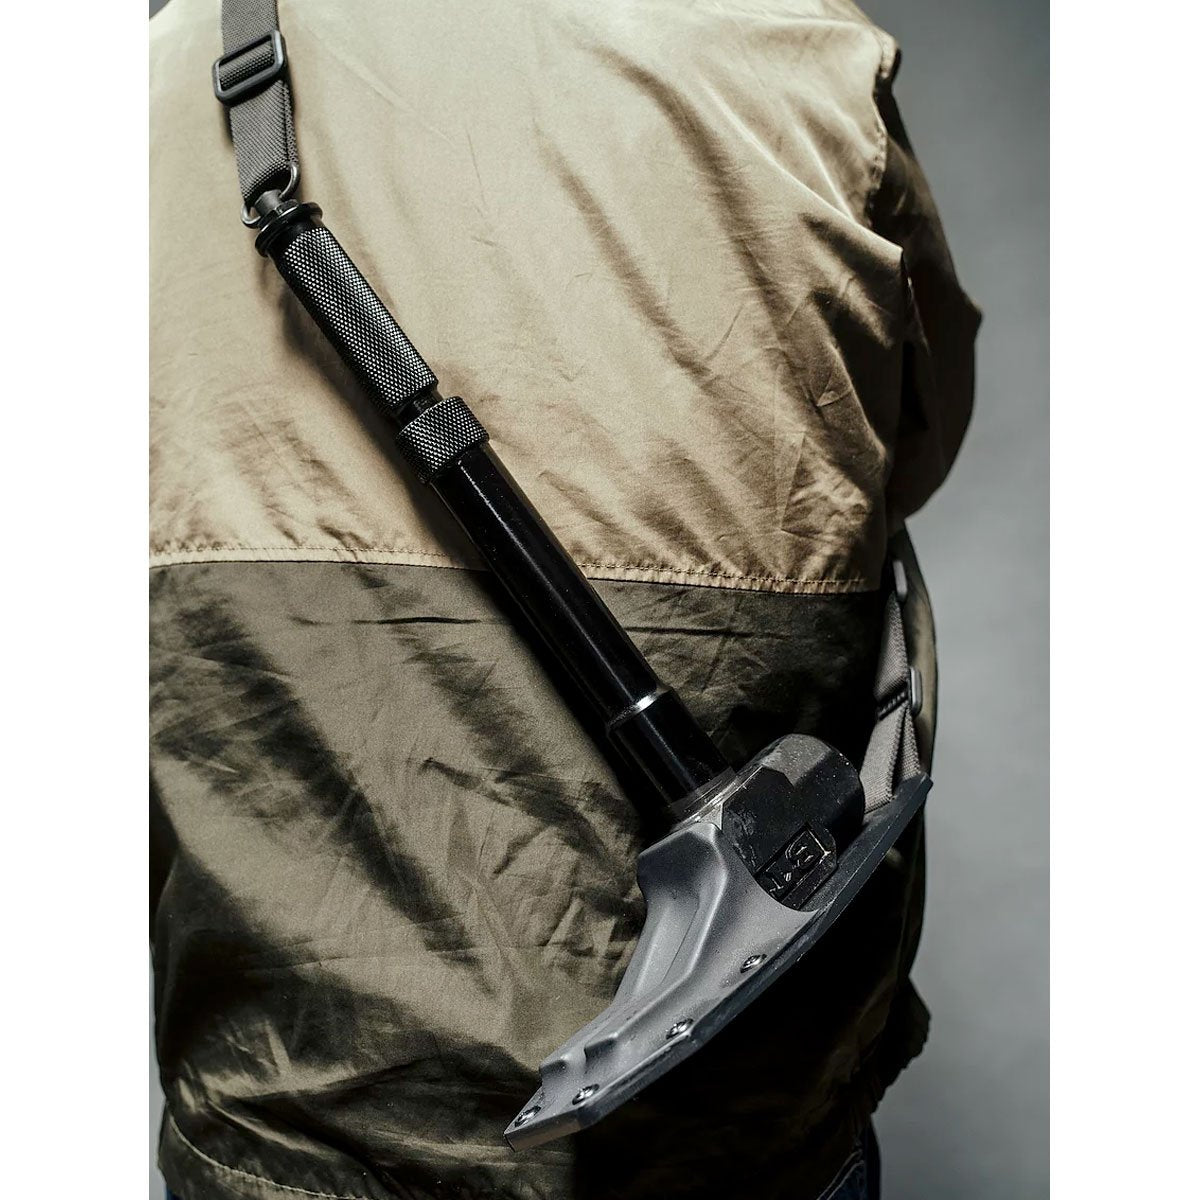 BTI Sling for The Eagle Training Equipment Breaching Technologies Inc Tactical Gear Supplier Tactical Distributors Australia